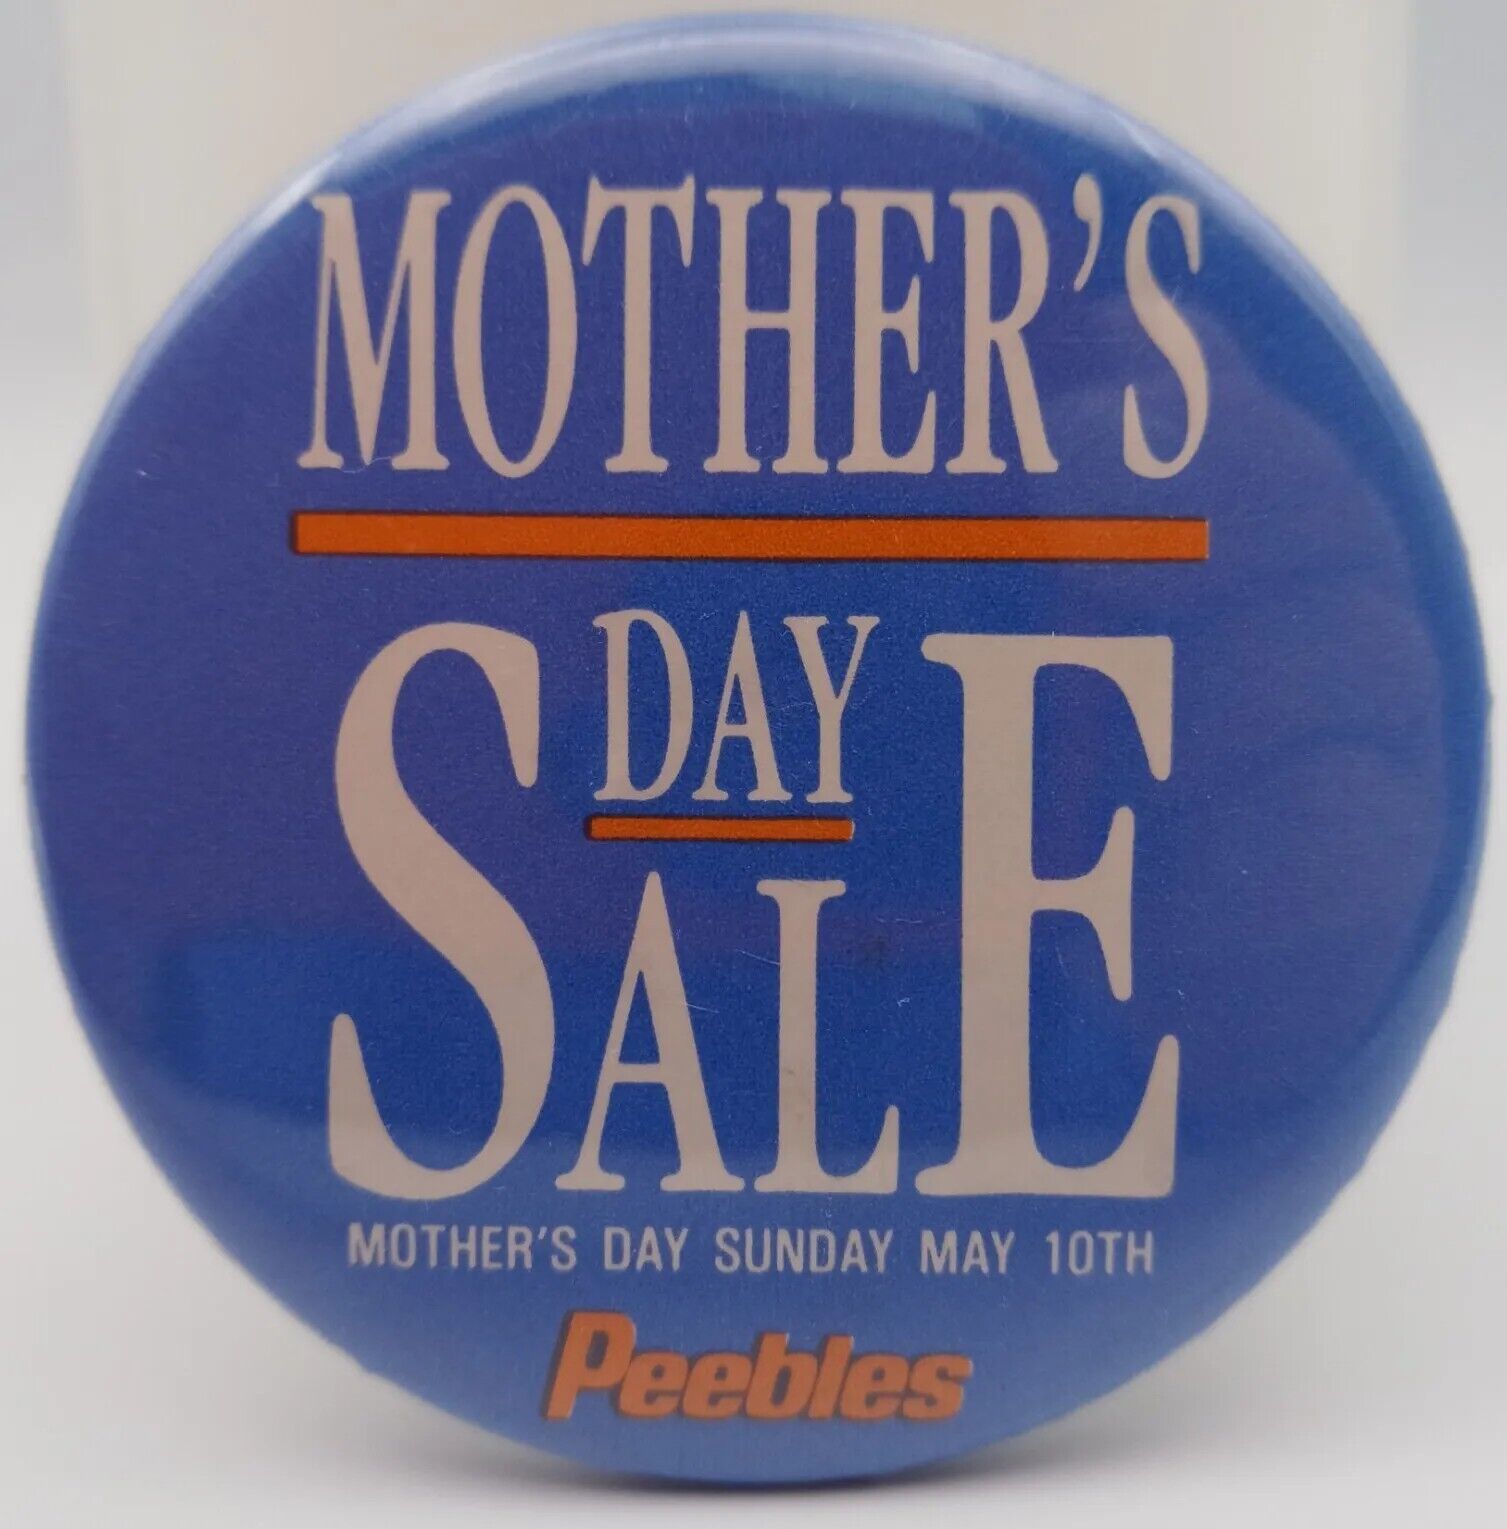 Vintage Peebles Department Store Mothers Day Sale Pinback Button Advertising Pin